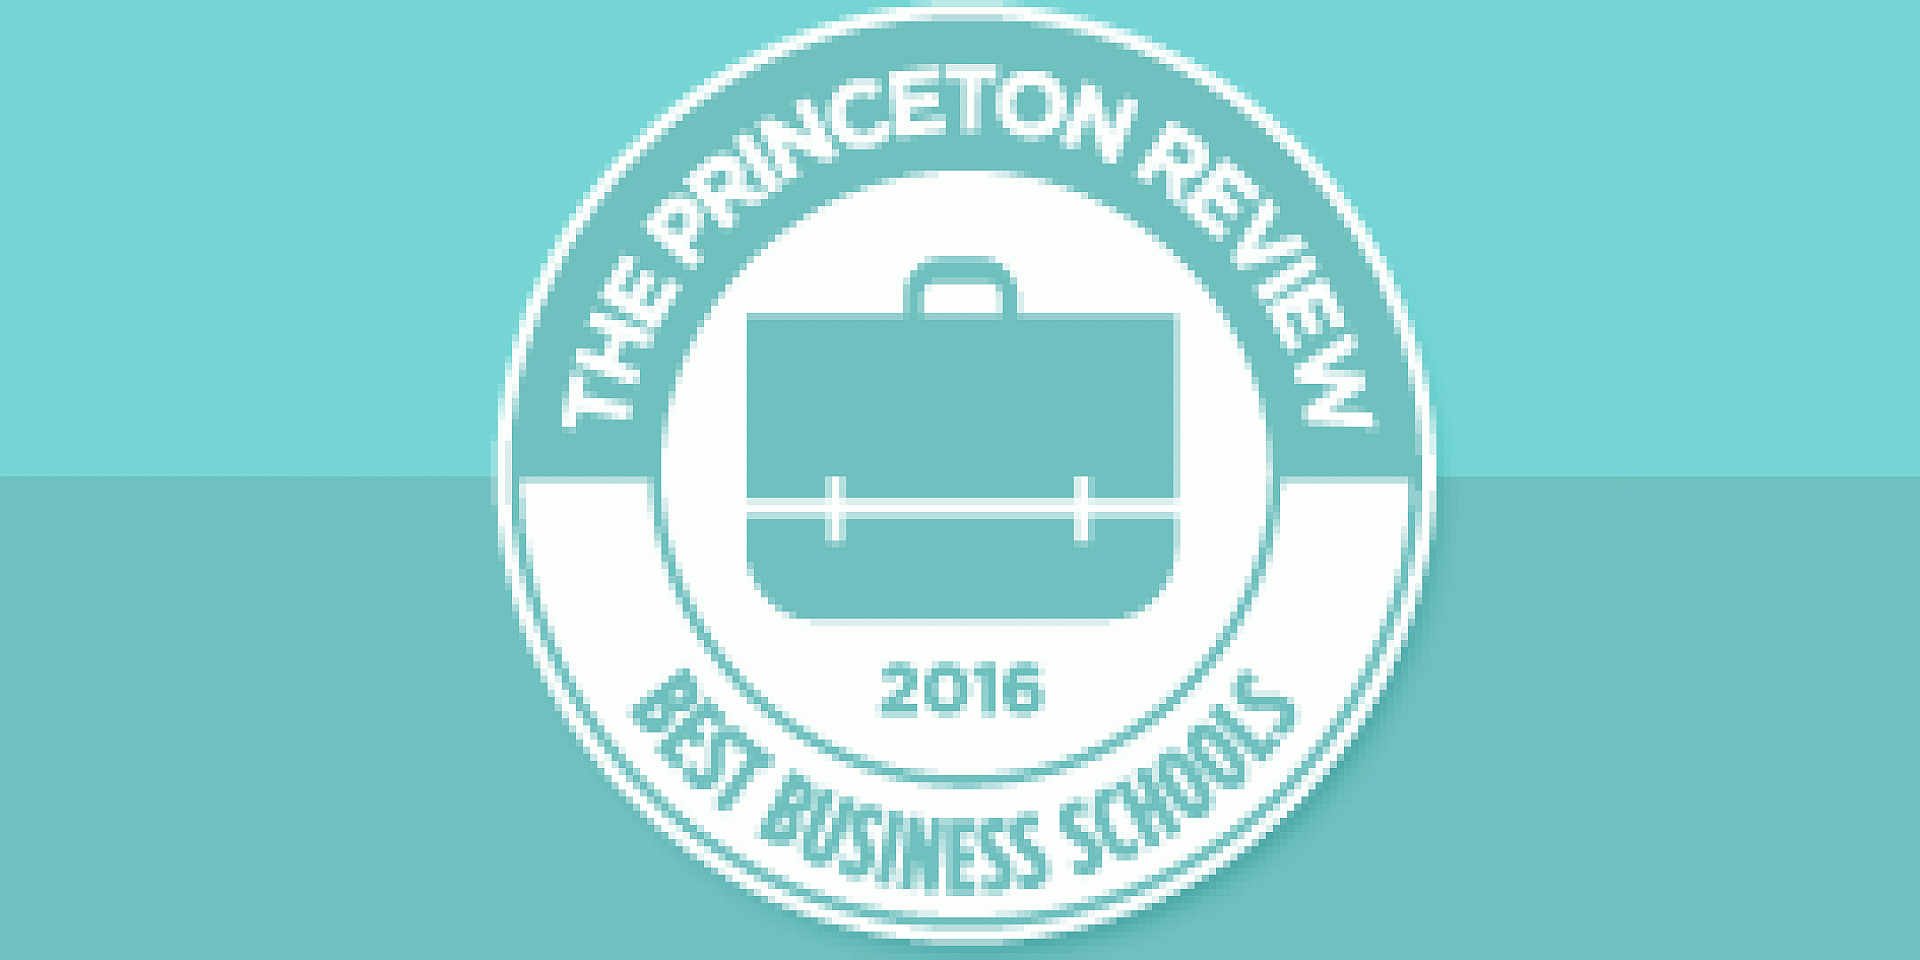 The Princeton Review 2016 Best Business Schools